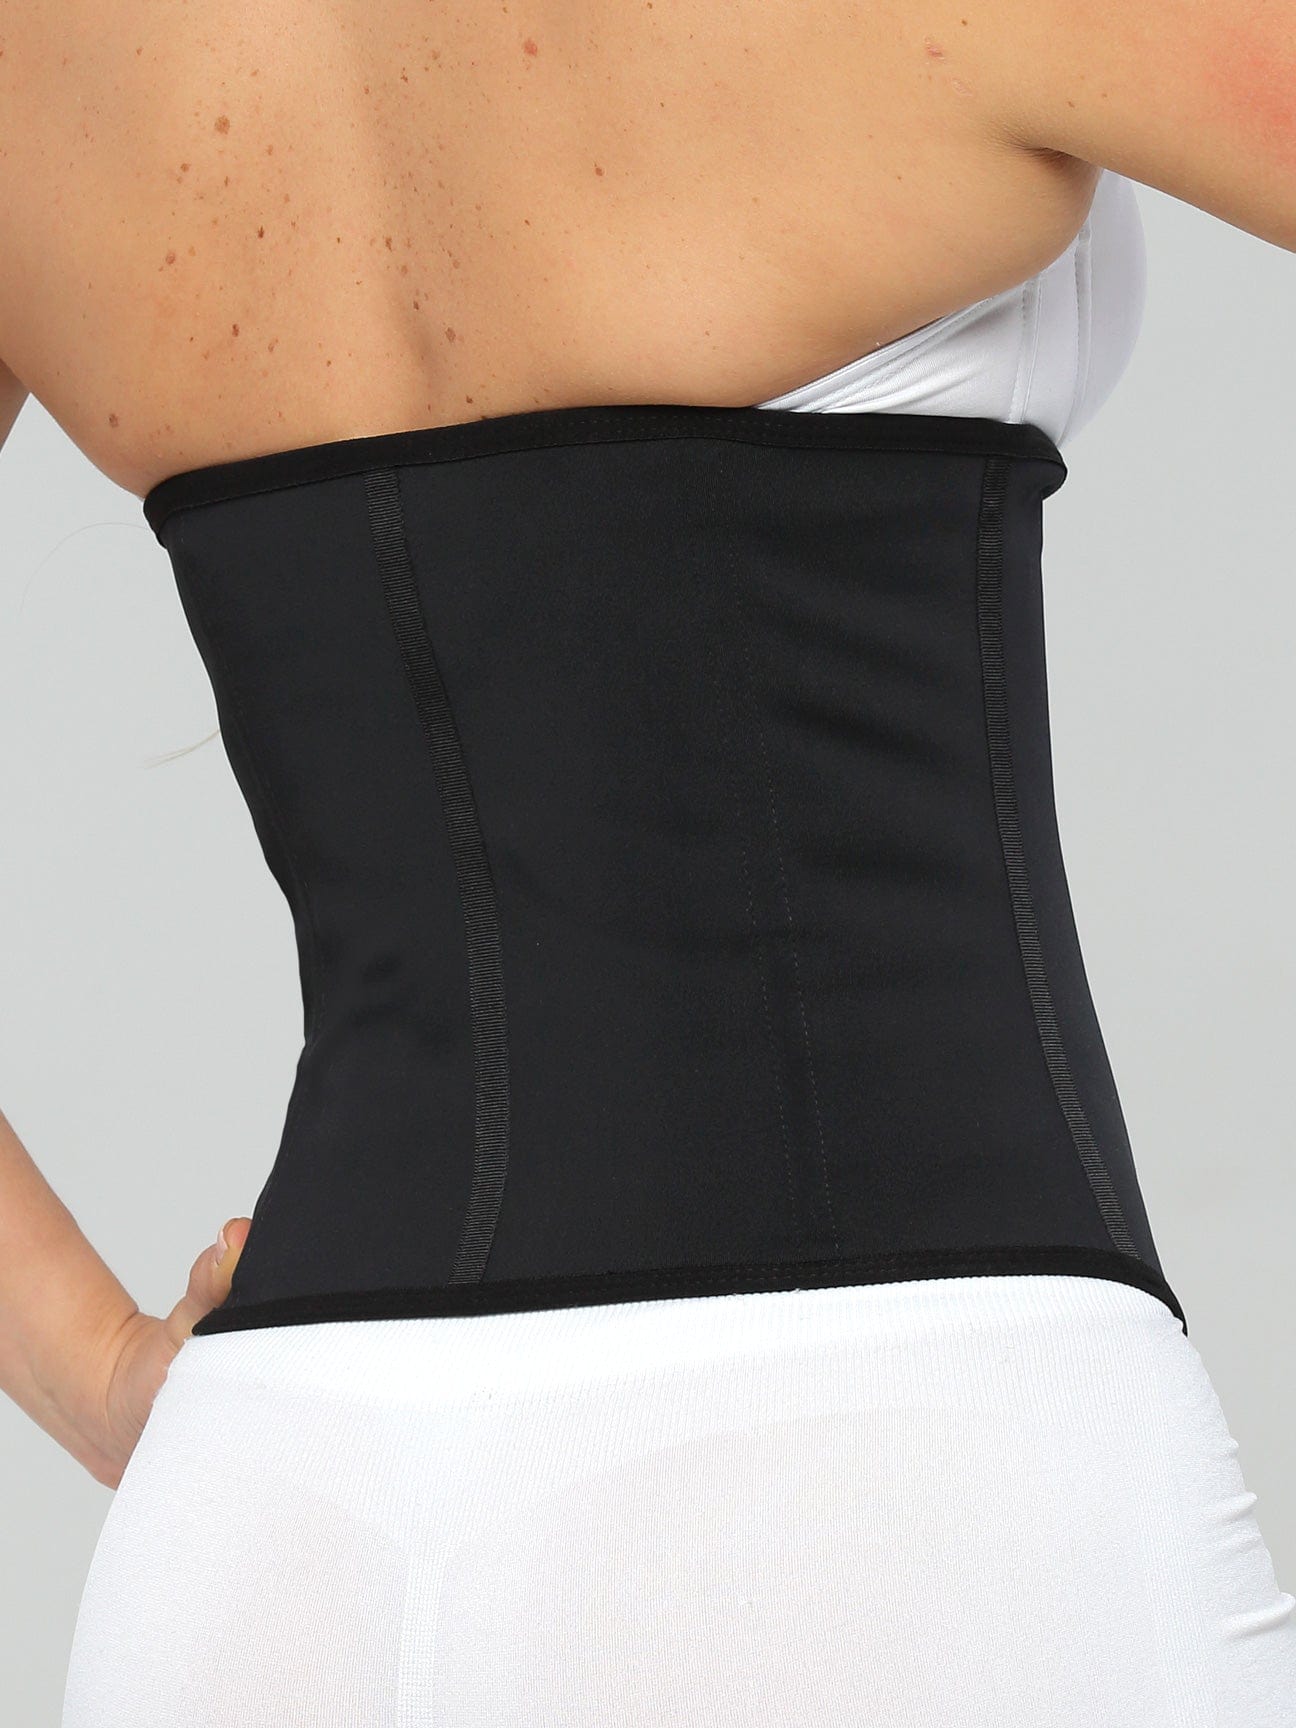 Back view of Black Sports Latex Covered Workout Waist Trainer.